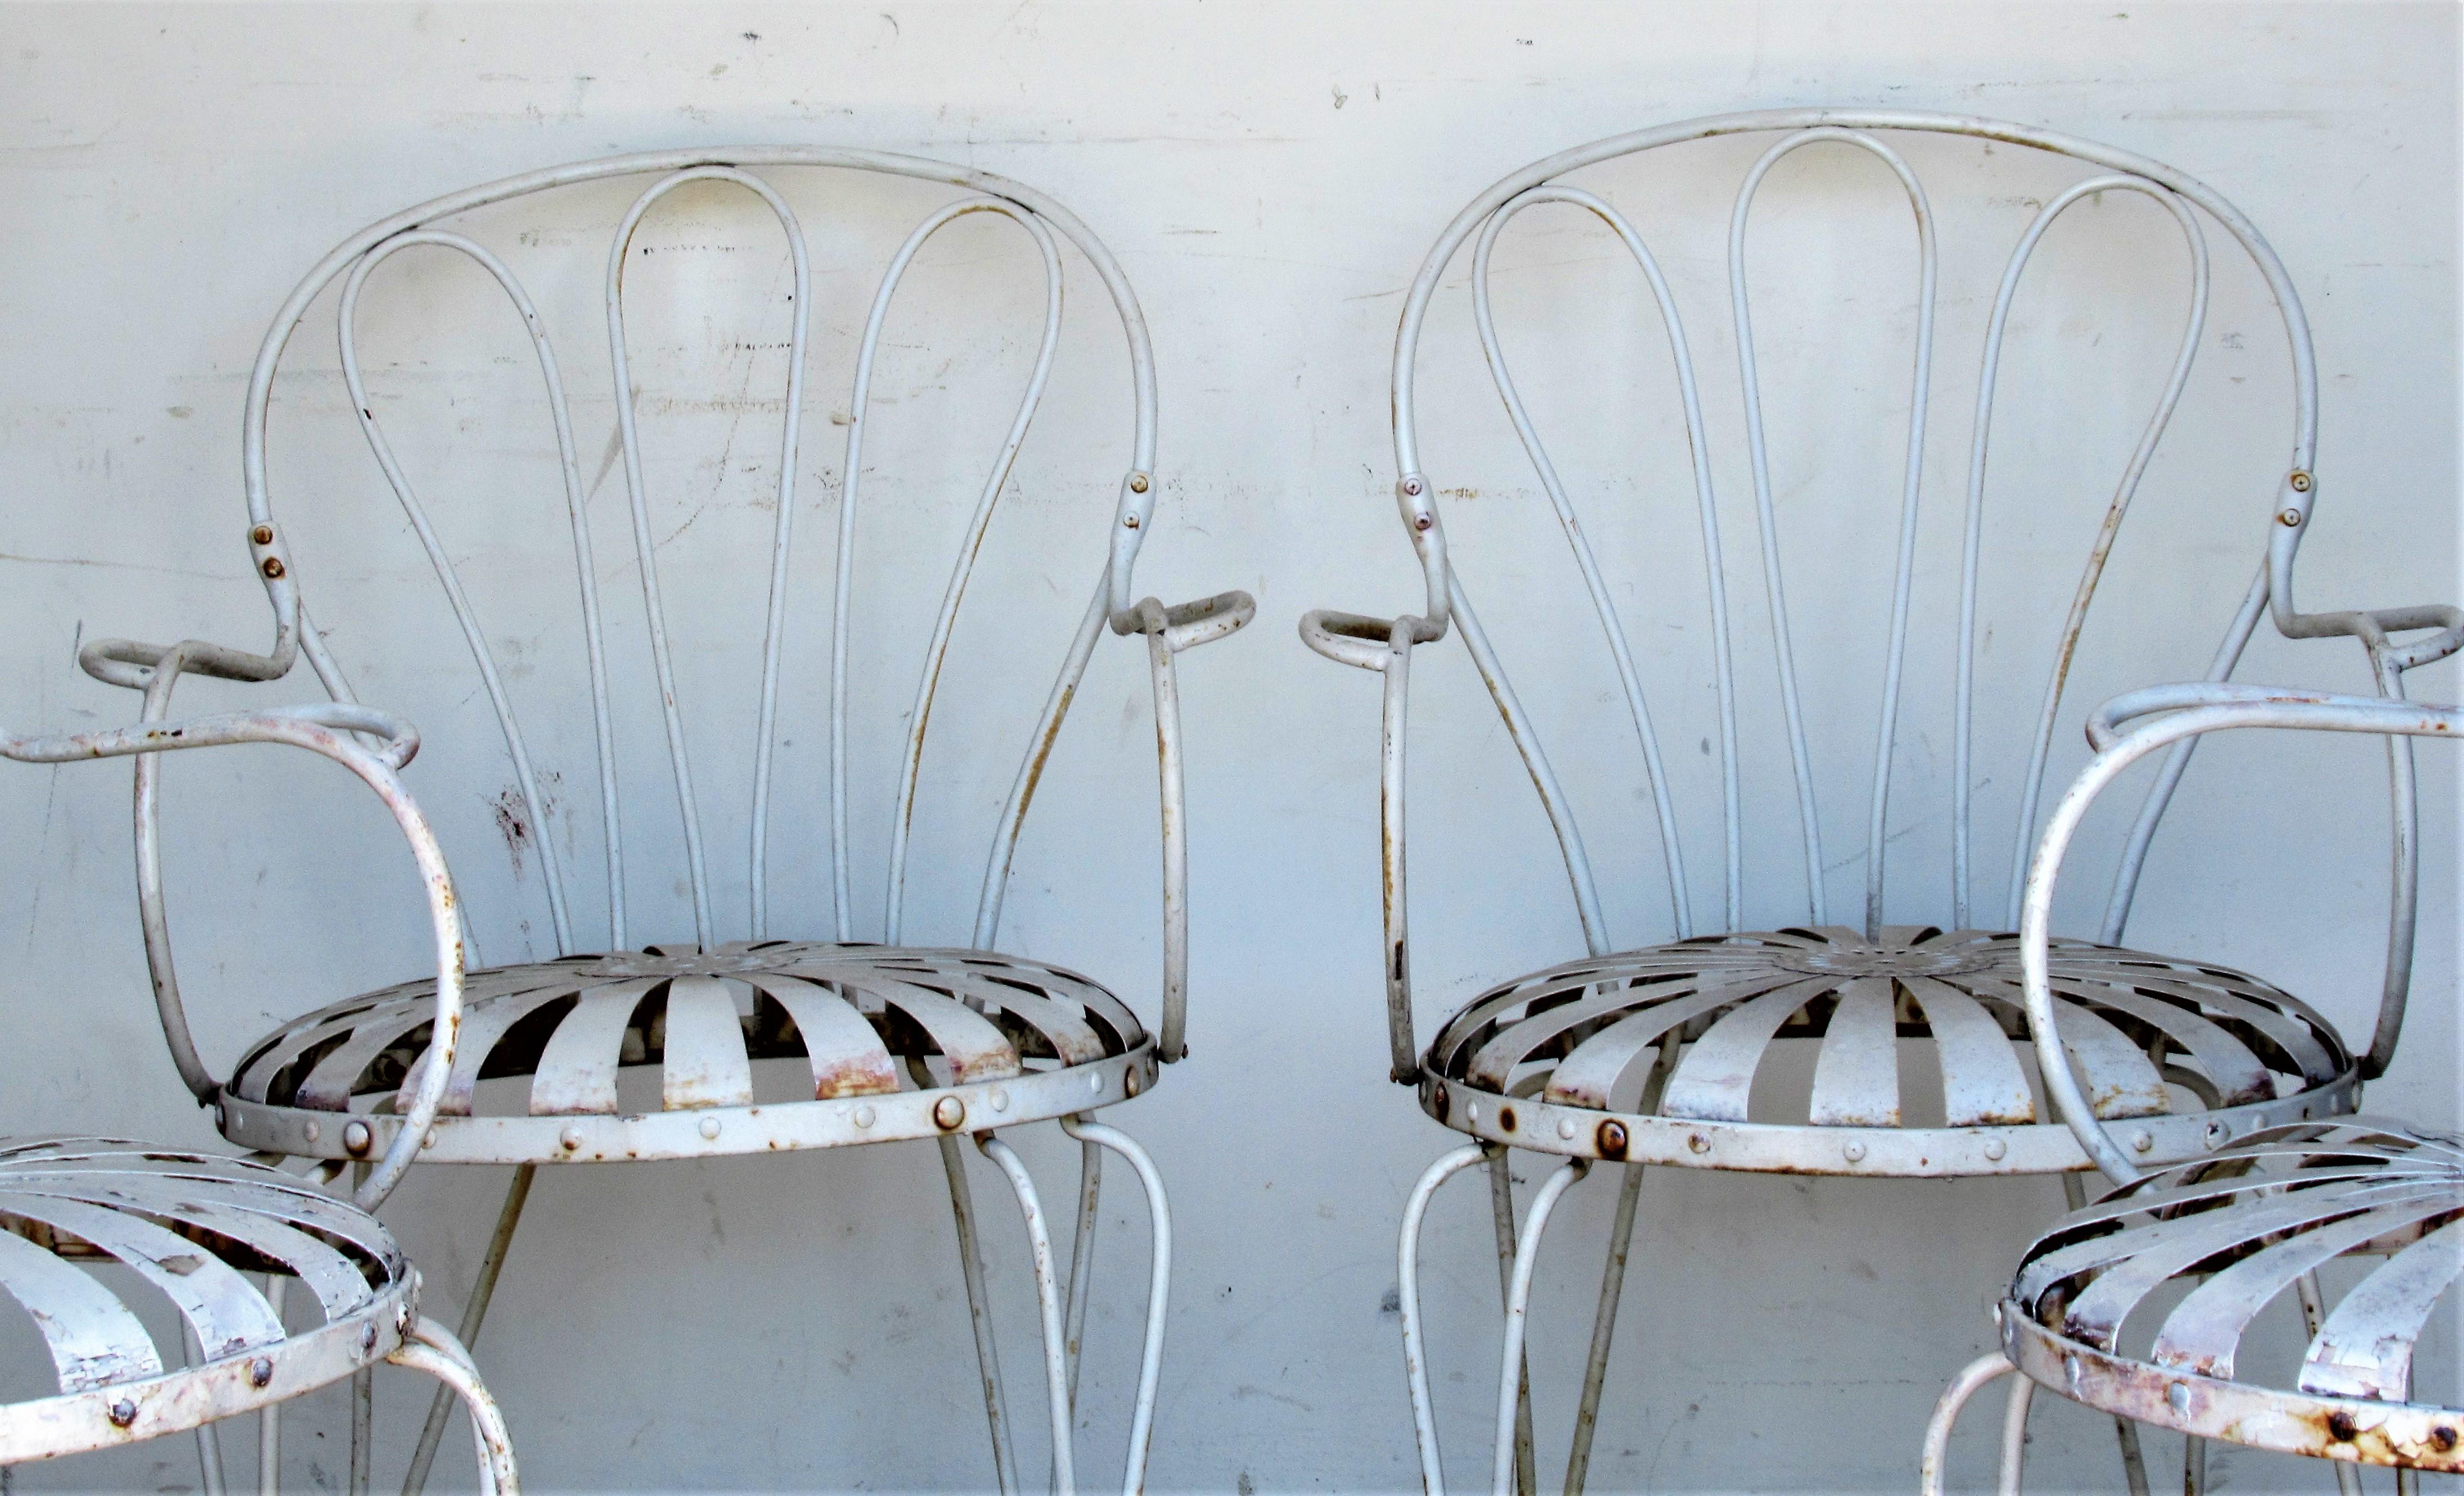 Set of four Francois Carre iron garden chairs with sunburst / pinwheel design spring steel seats. All four chairs in overall old worn white painted surface, circa 1930-1940. Look at all pictures and read condition report in comment section/